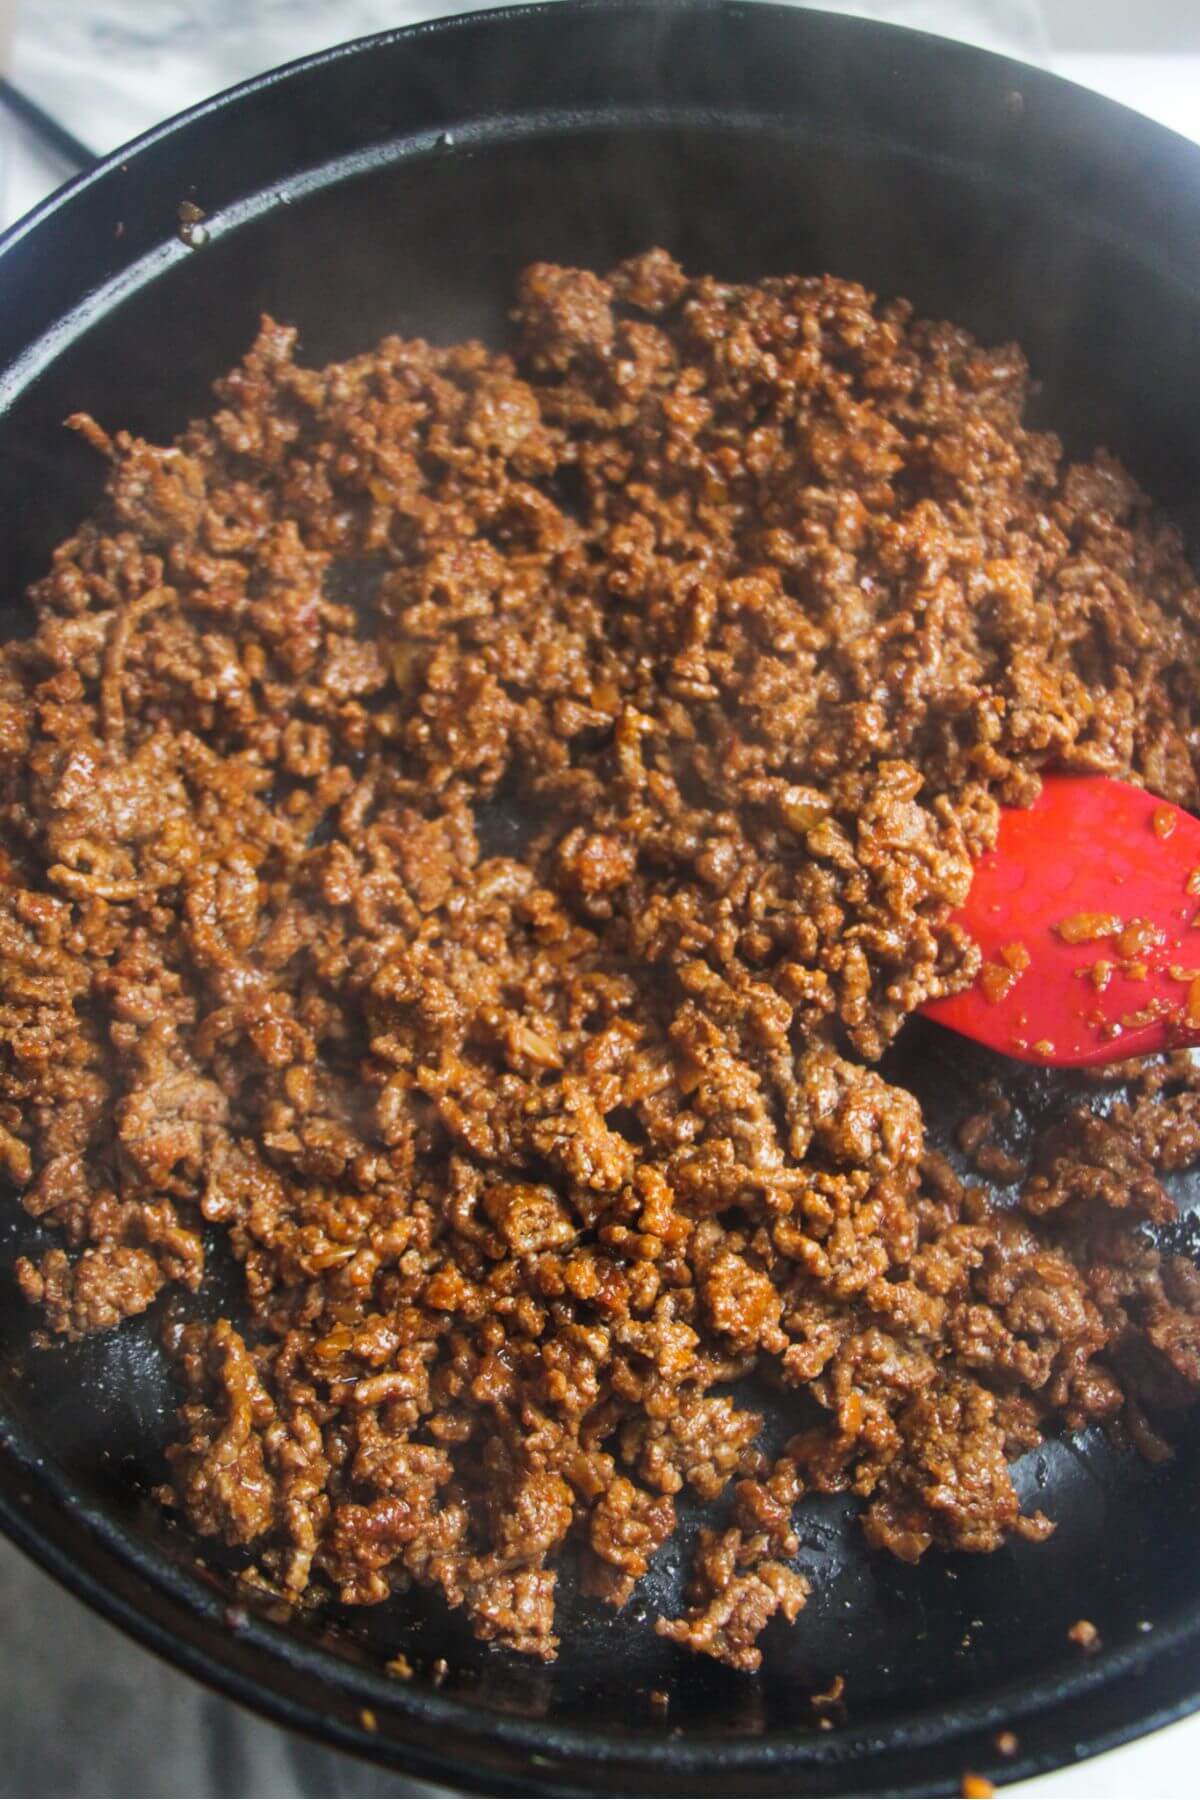 Red spatula stirring browned beef in a large black pan.